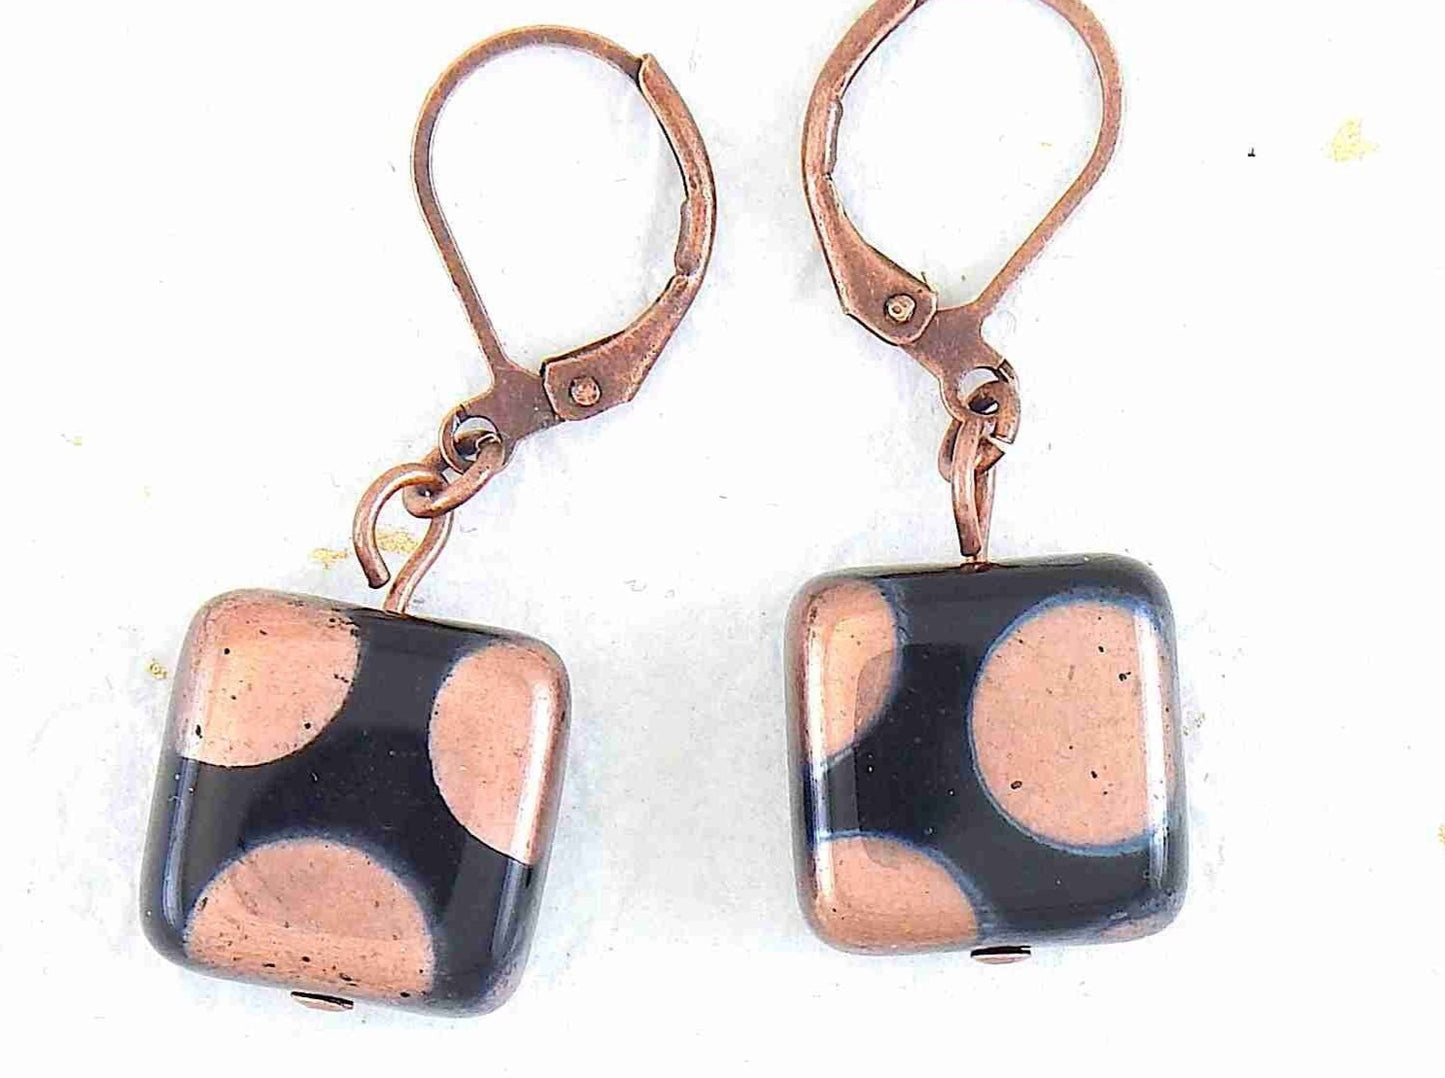 Short earrings with small shiny black Czech glass squares, large silver/copper/multicoloured dots, stainless steel lever back hooks